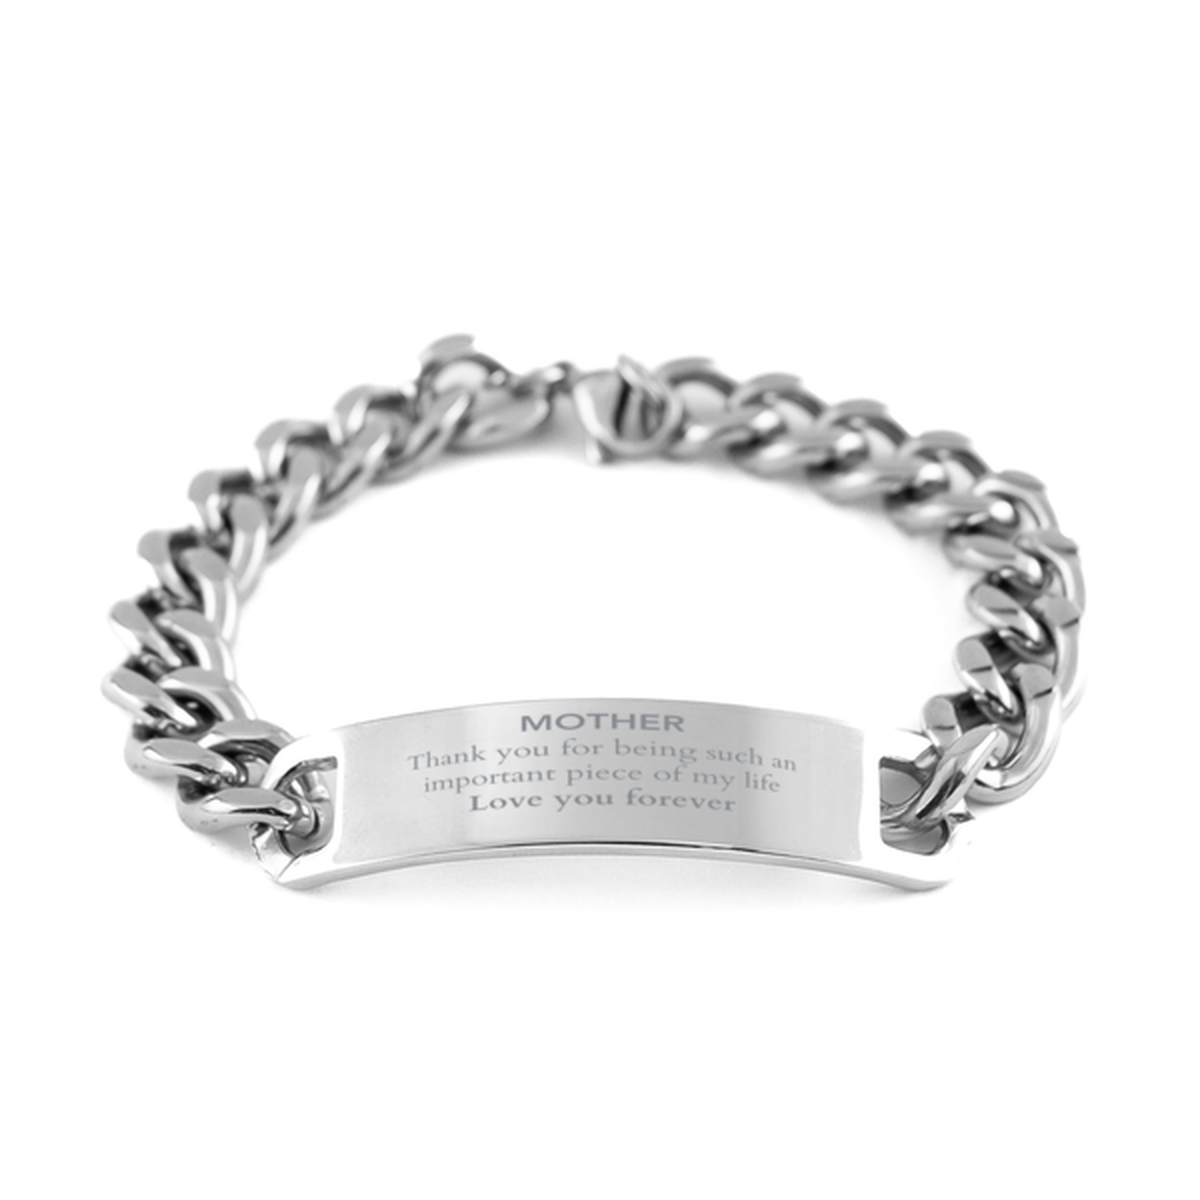 Appropriate Mother Cuban Chain Stainless Steel Bracelet Epic Birthday Gifts for Mother Thank you for being such an important piece of my life Mother Christmas Mothers Fathers Day